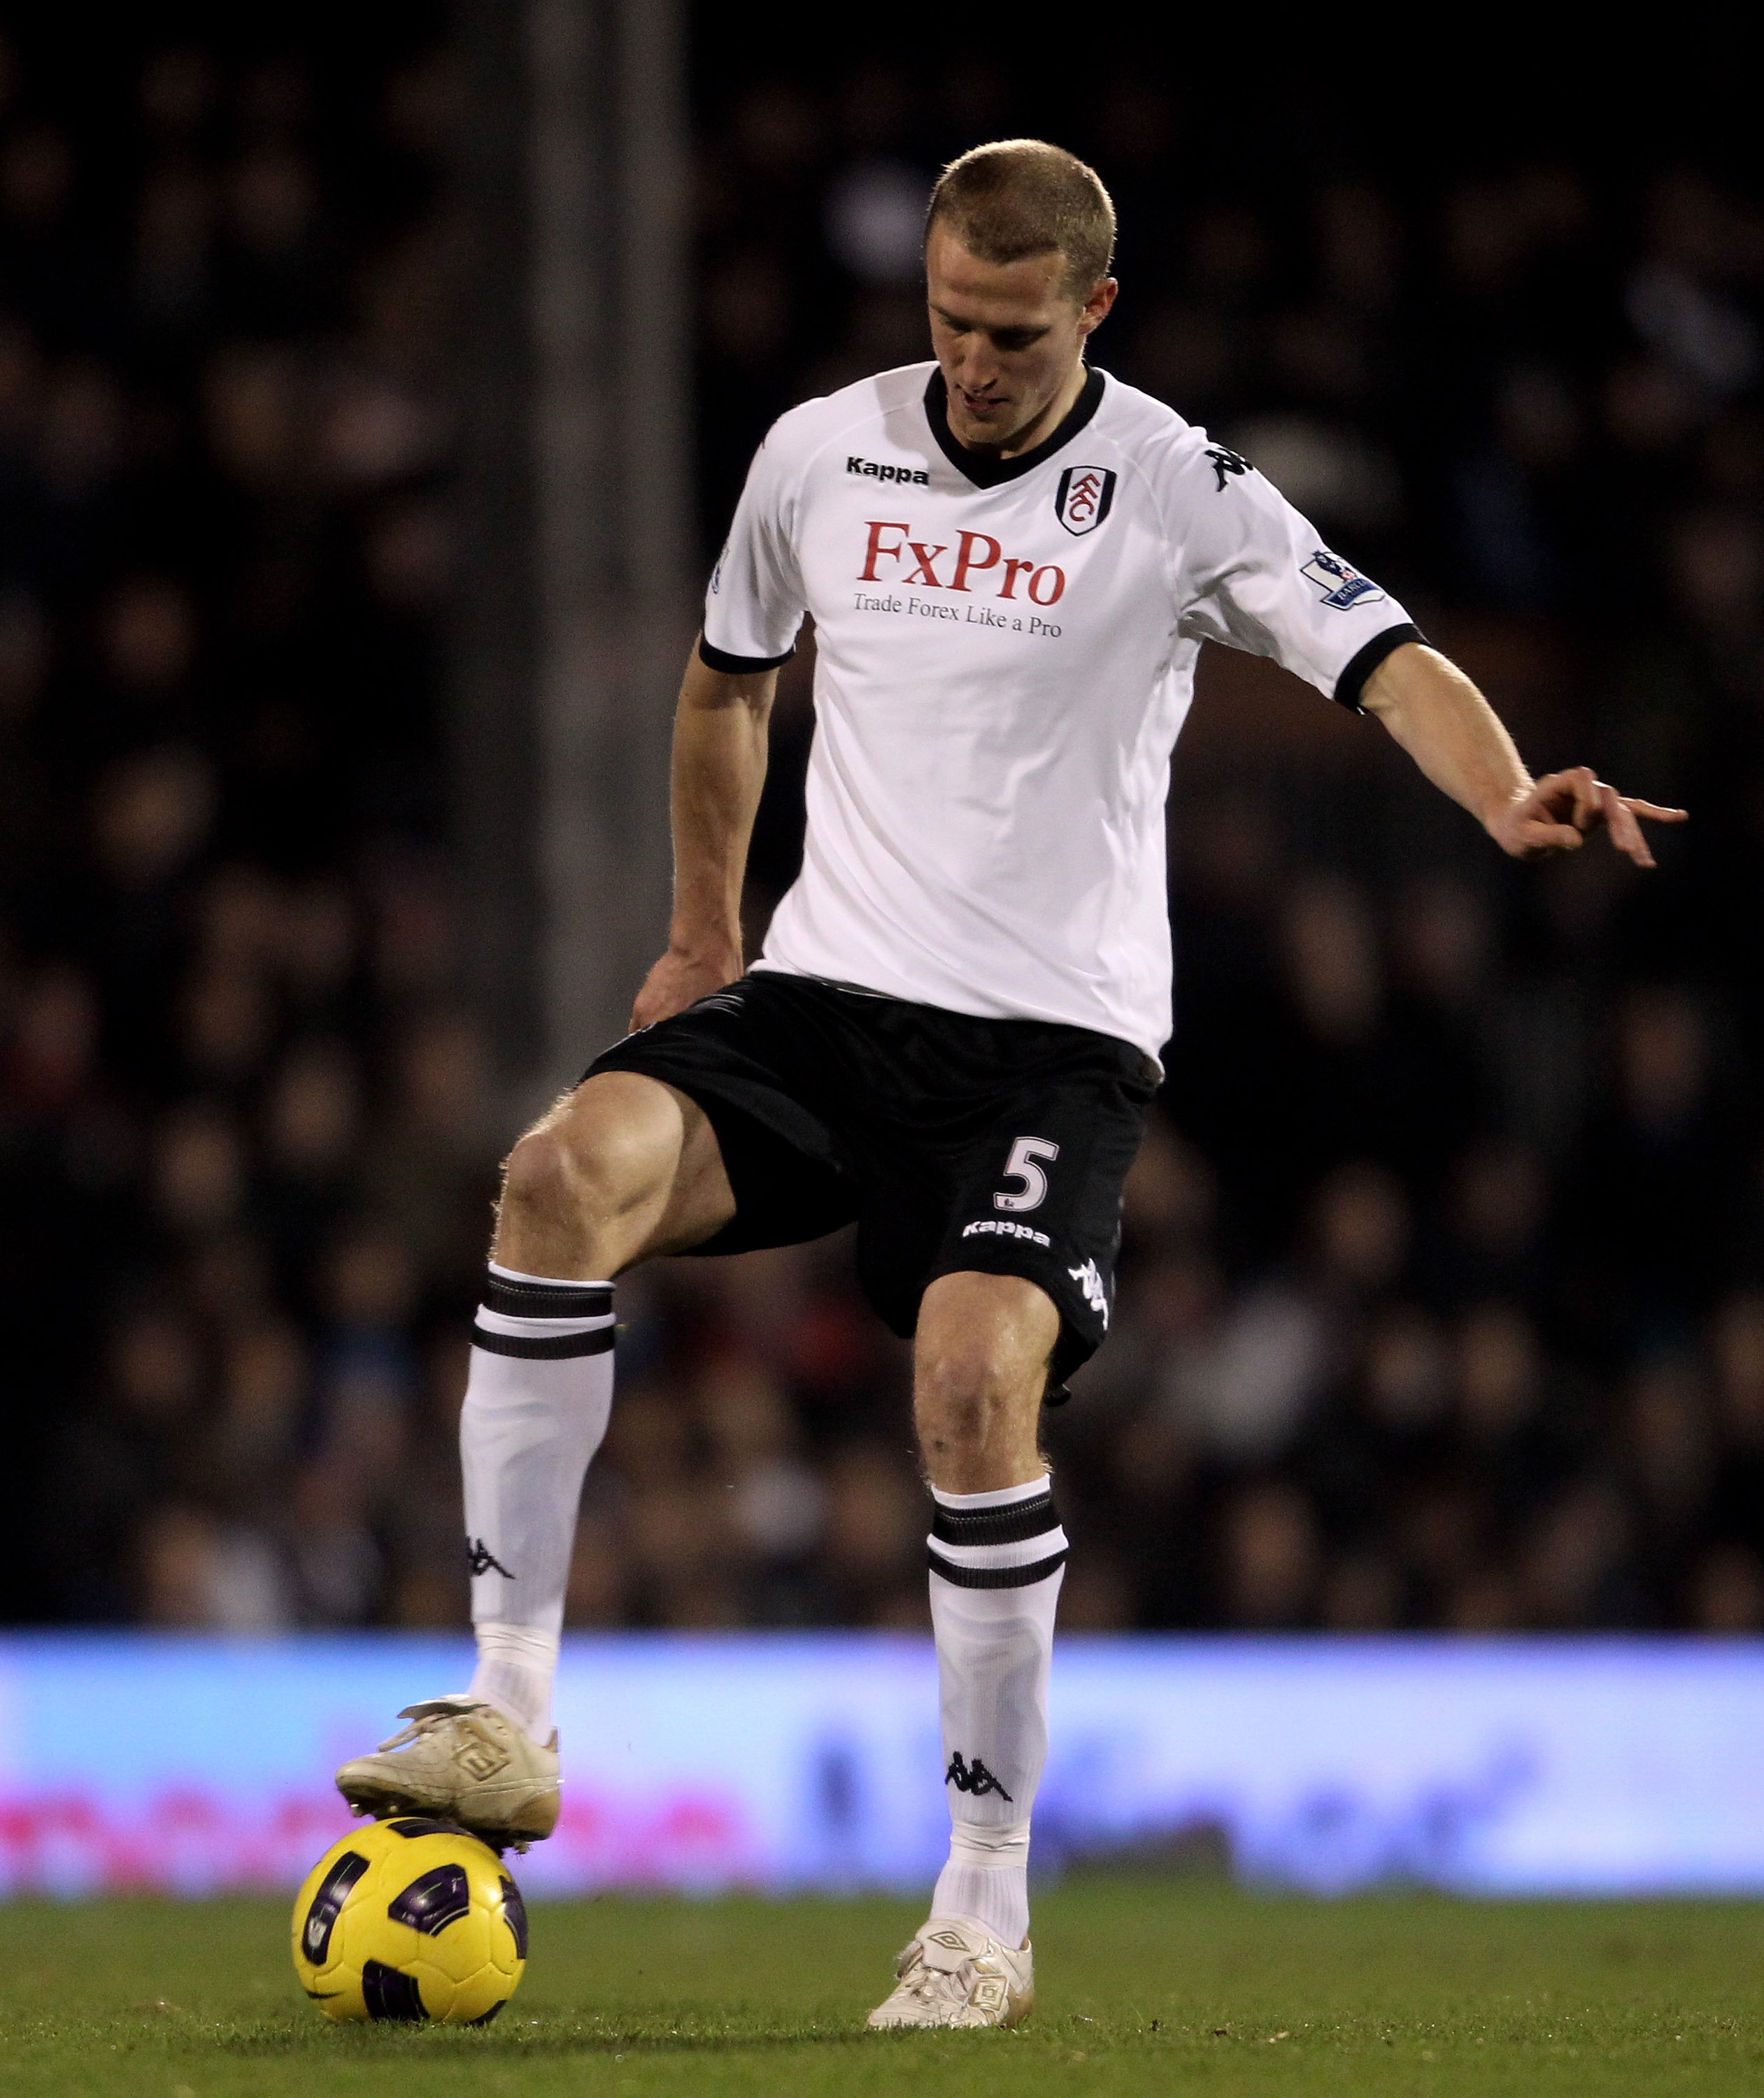 LONDON, ENGLAND - JANUARY 04:  Brede Hangeland of Fulham controls the ball during the Barclays Premier League match between Fulham and West Bromwich Albion at Craven Cottage on January 4, 2011 in London, England.  (Photo by Scott Heavey/Getty Images)